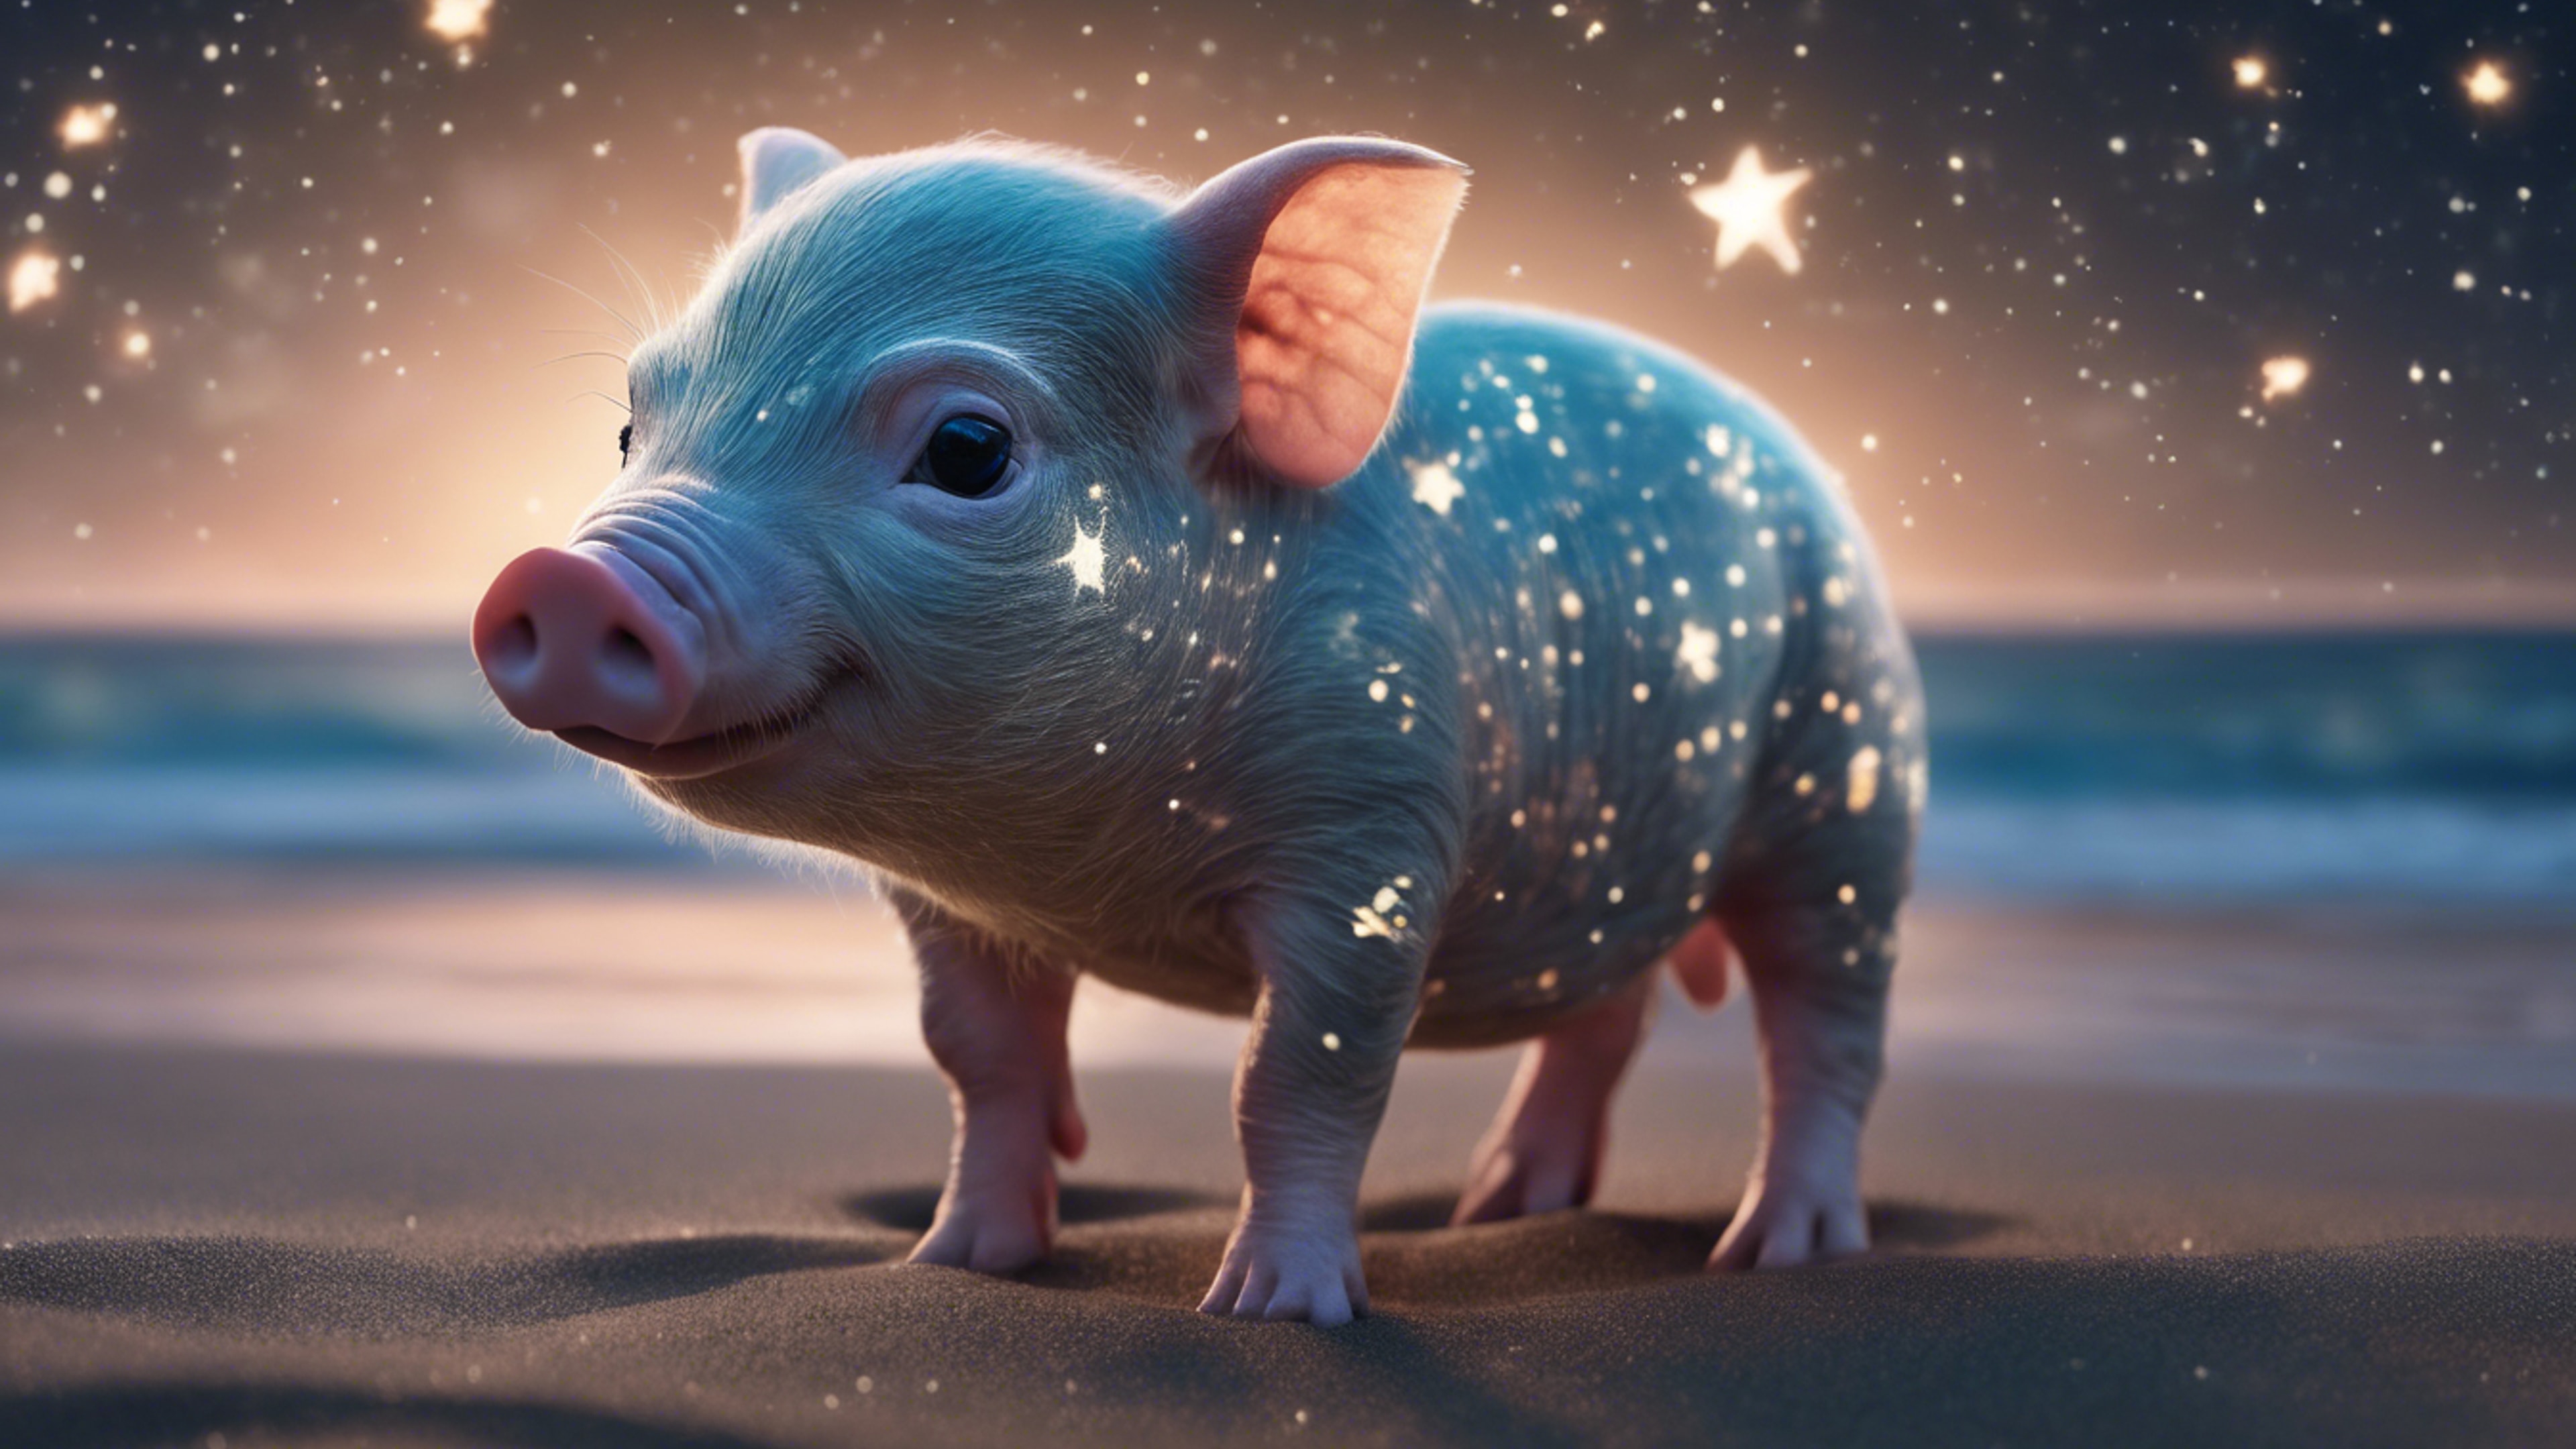 An unique digital rendering of a bioluminescent piglet on a calm beach under starry night sky. Tapet[597018af159c4f7fa895]